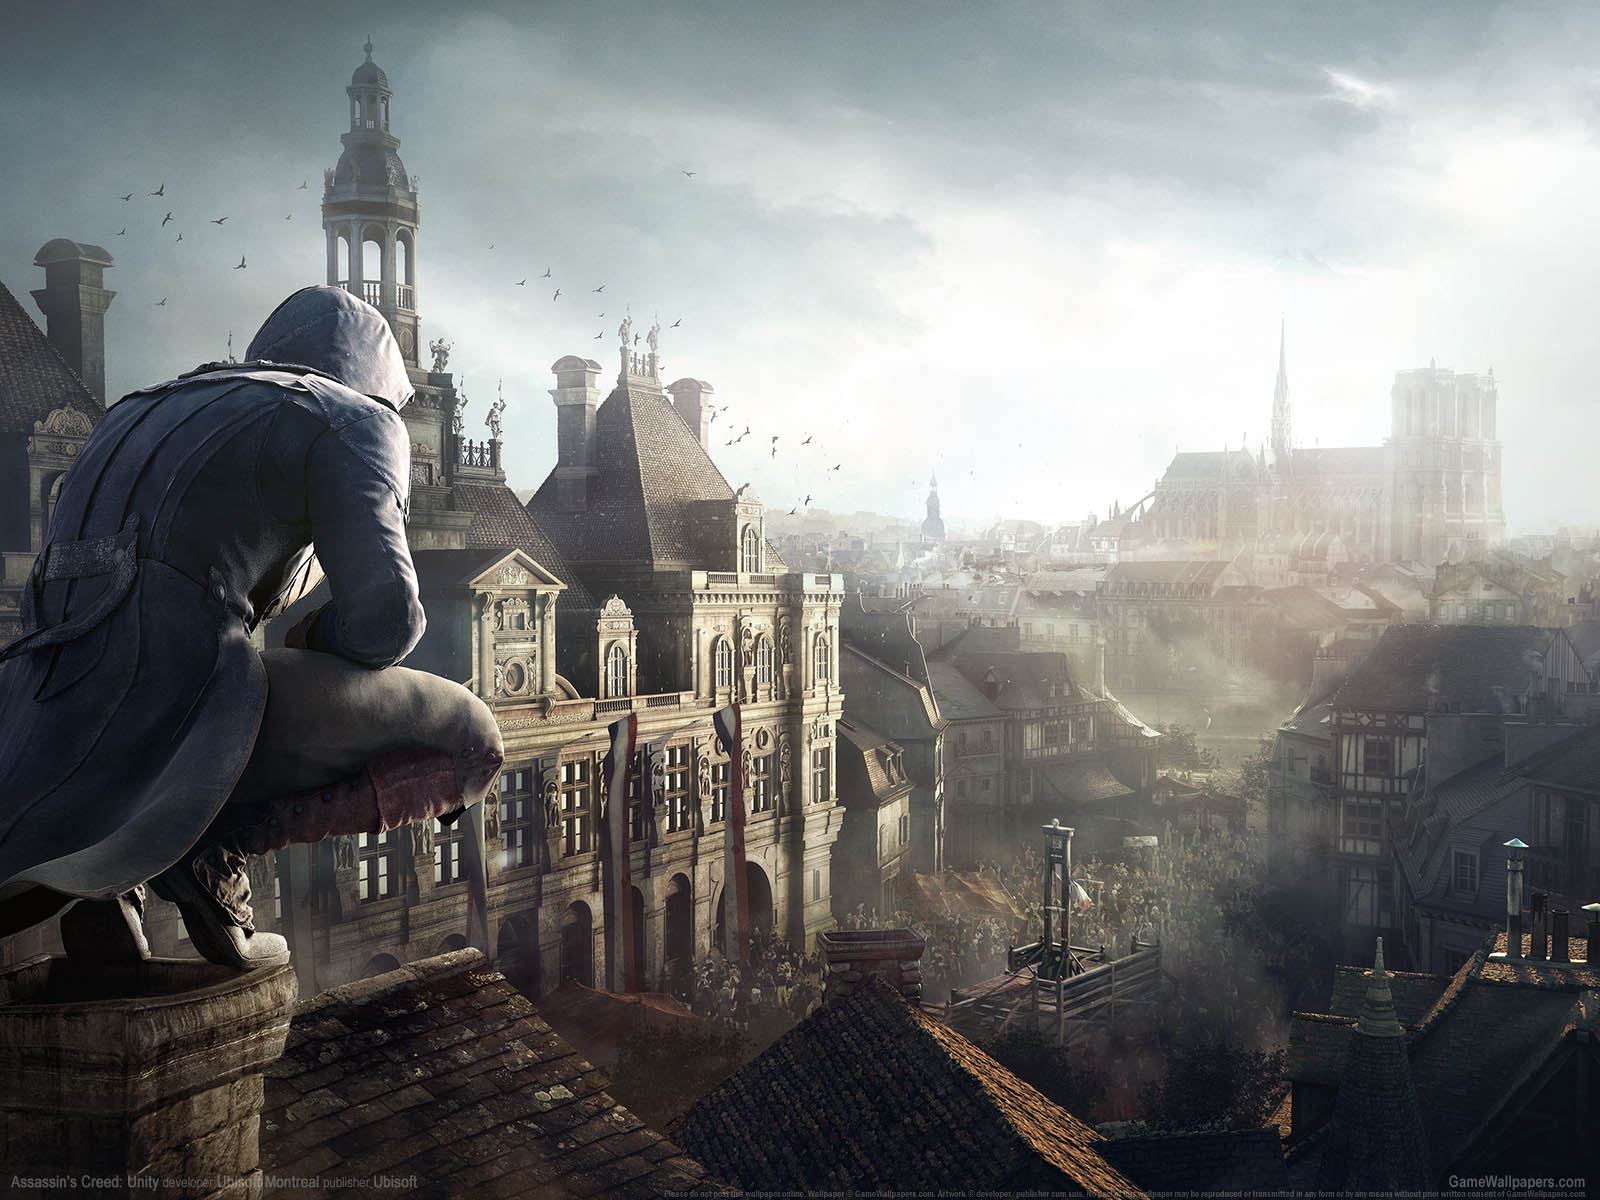 Assassin's Creed: Unityνmmer=13 achtergrond  1600x1200